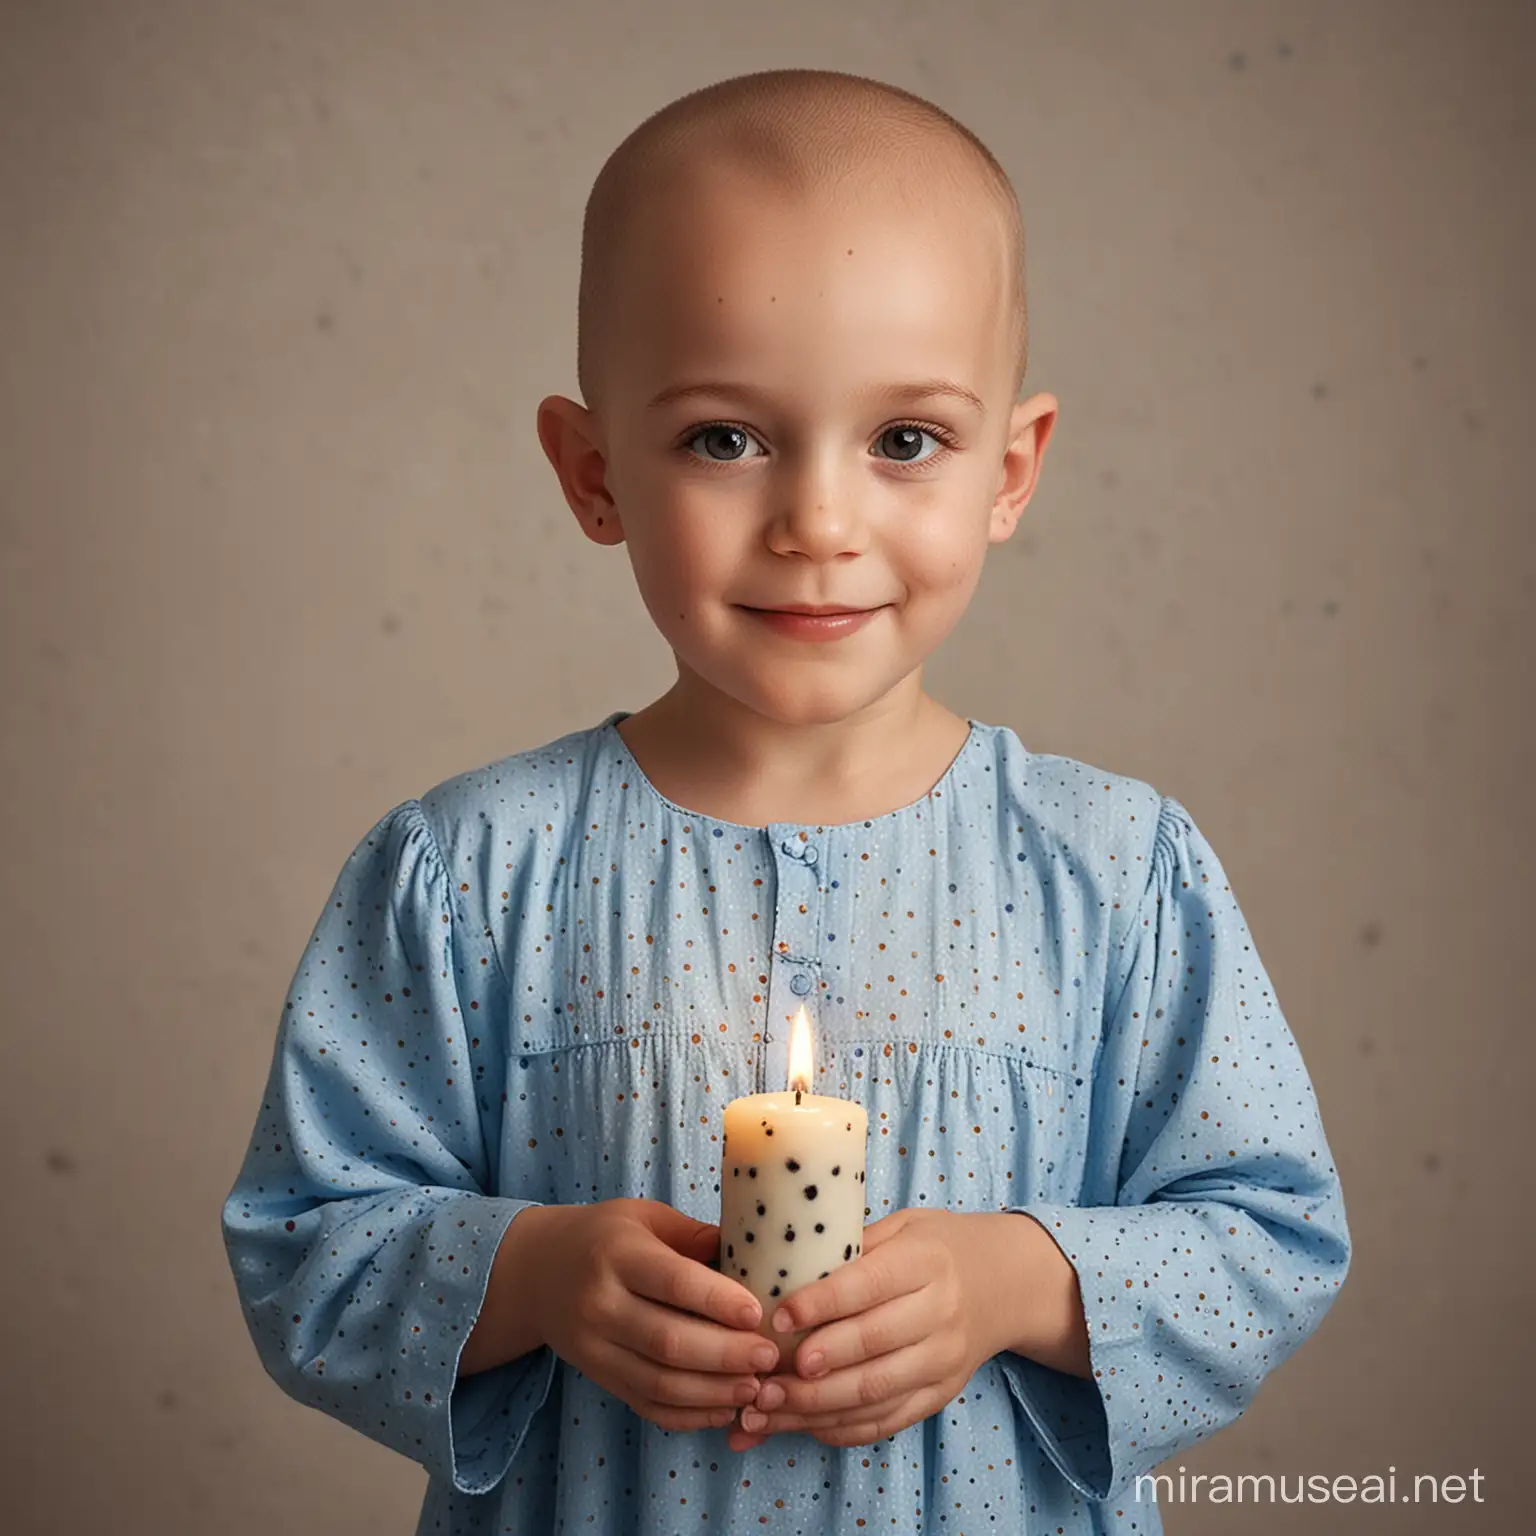 Young Cancer Patient Holding Candle in Hospital Attire